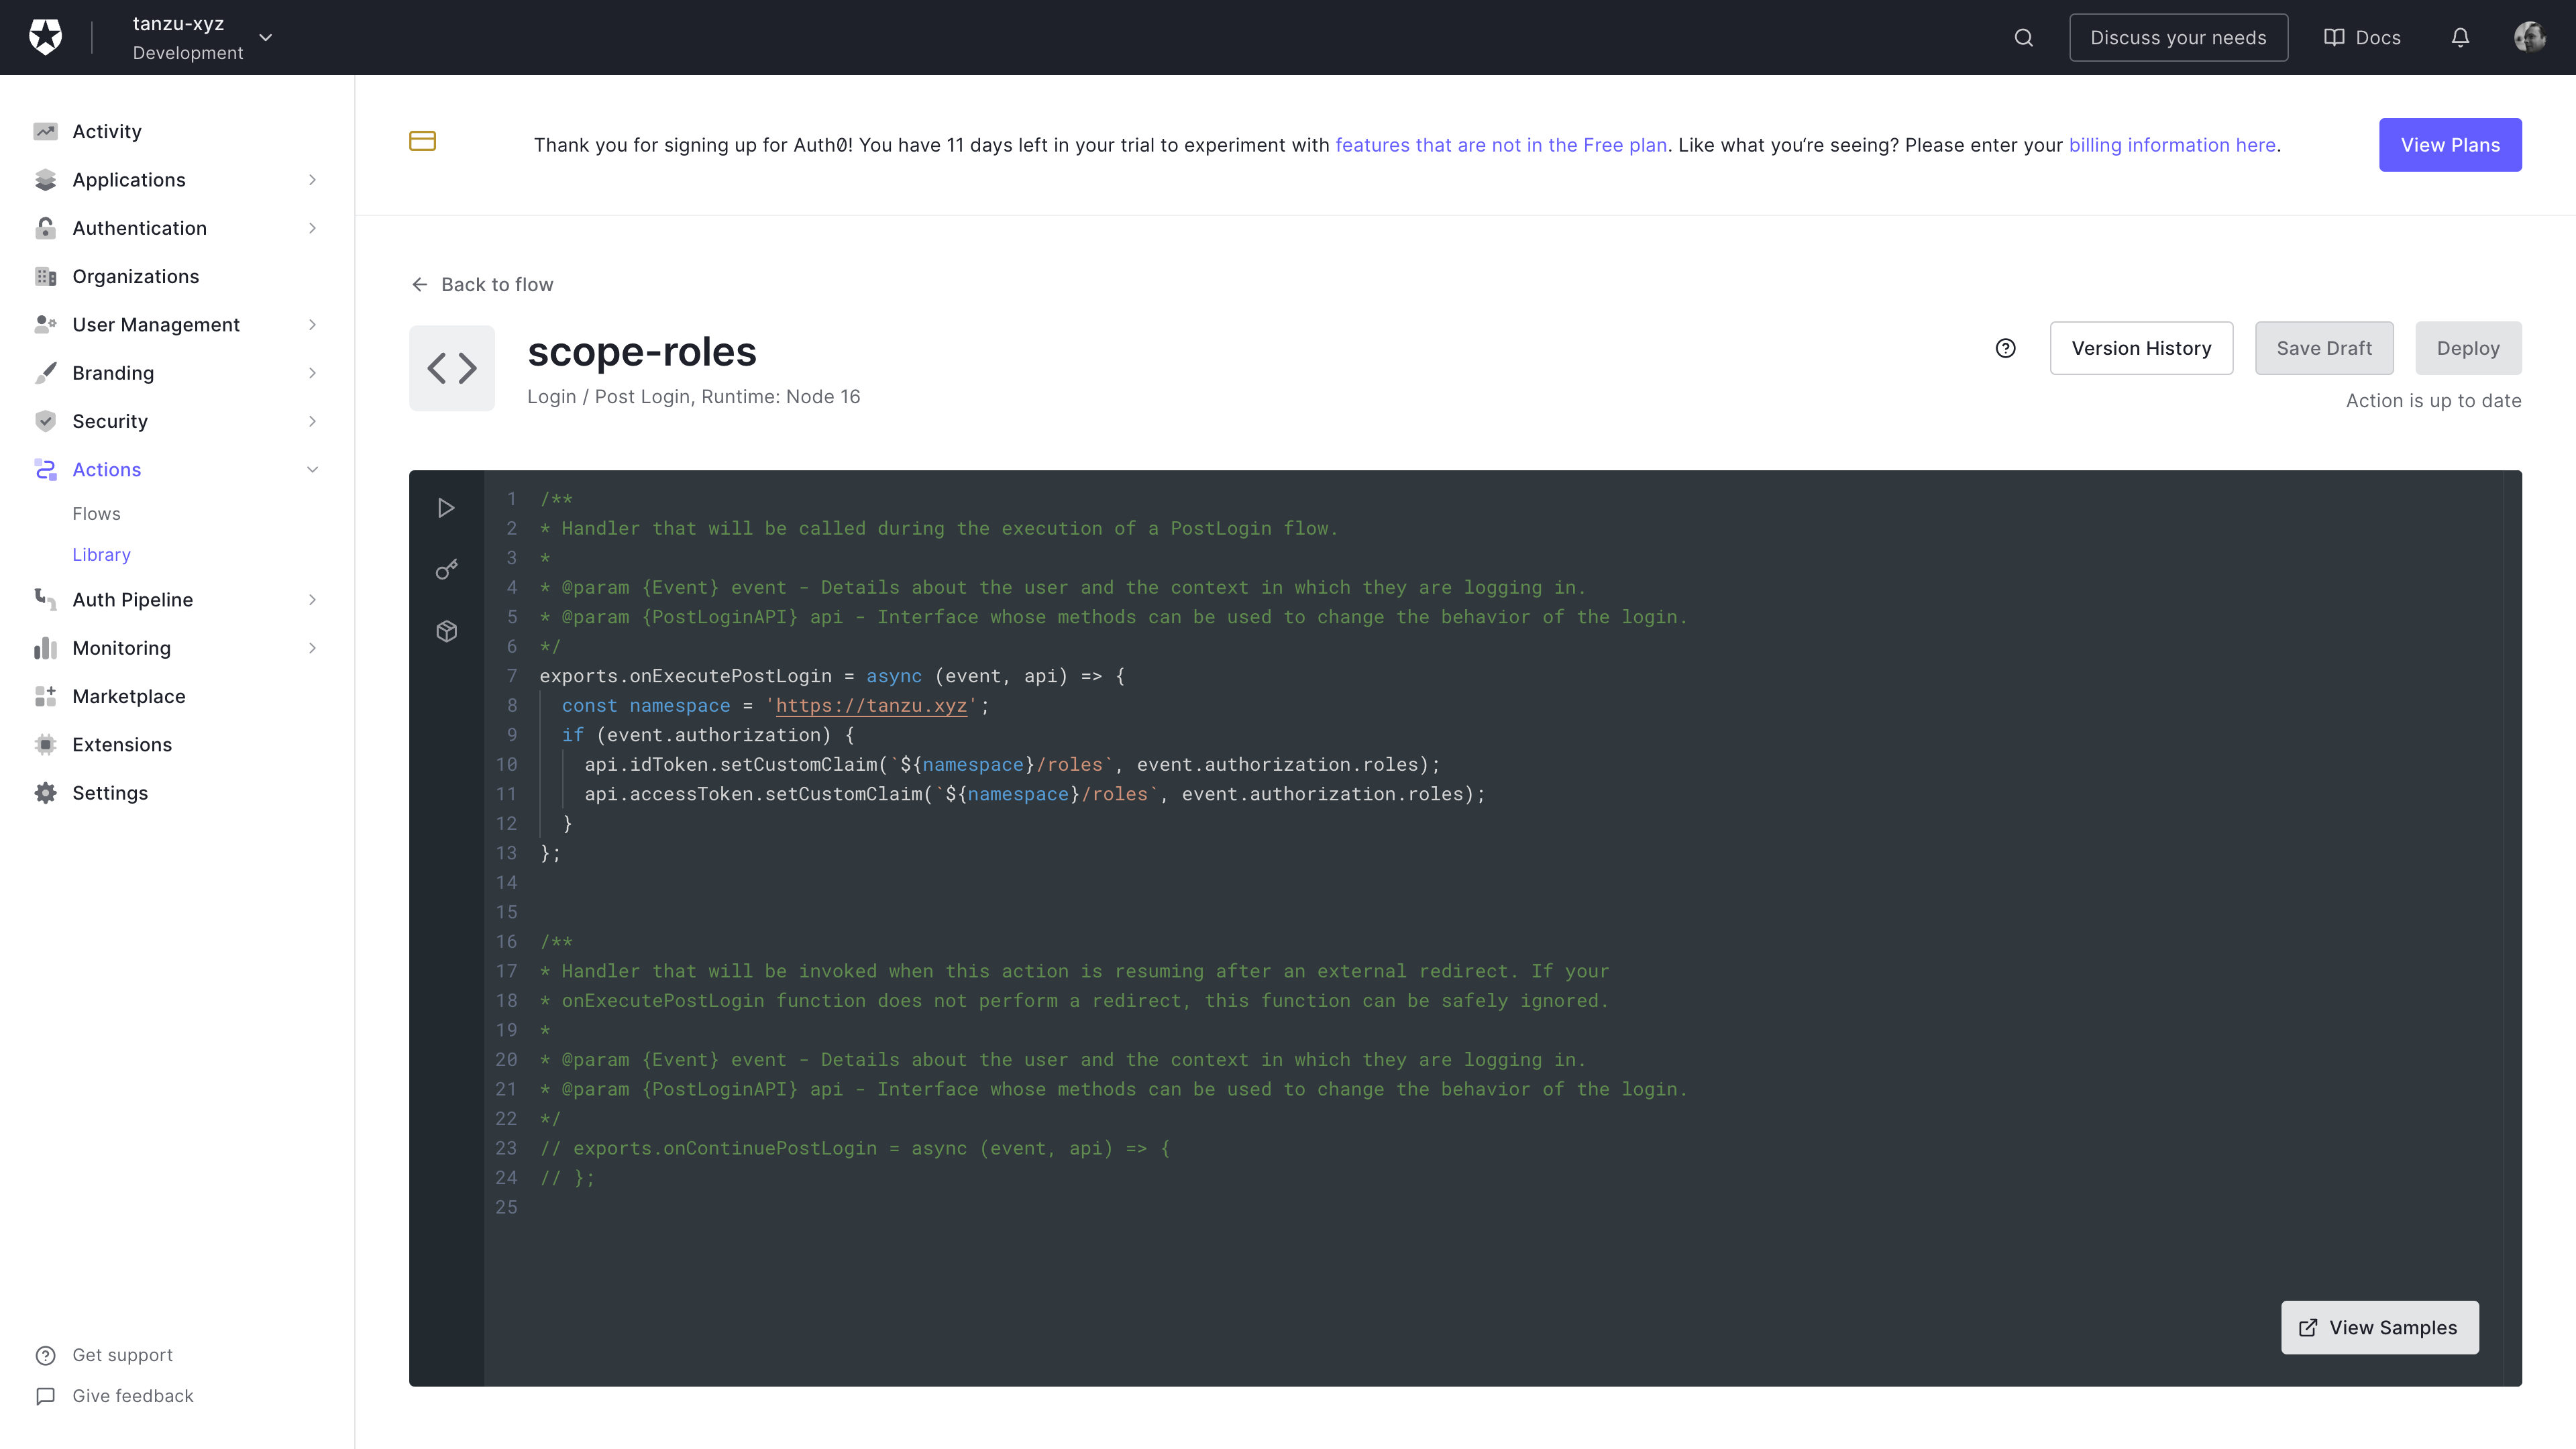 Screenshot of the Auth0 custom action editor. The code in the editor is reproduced below.